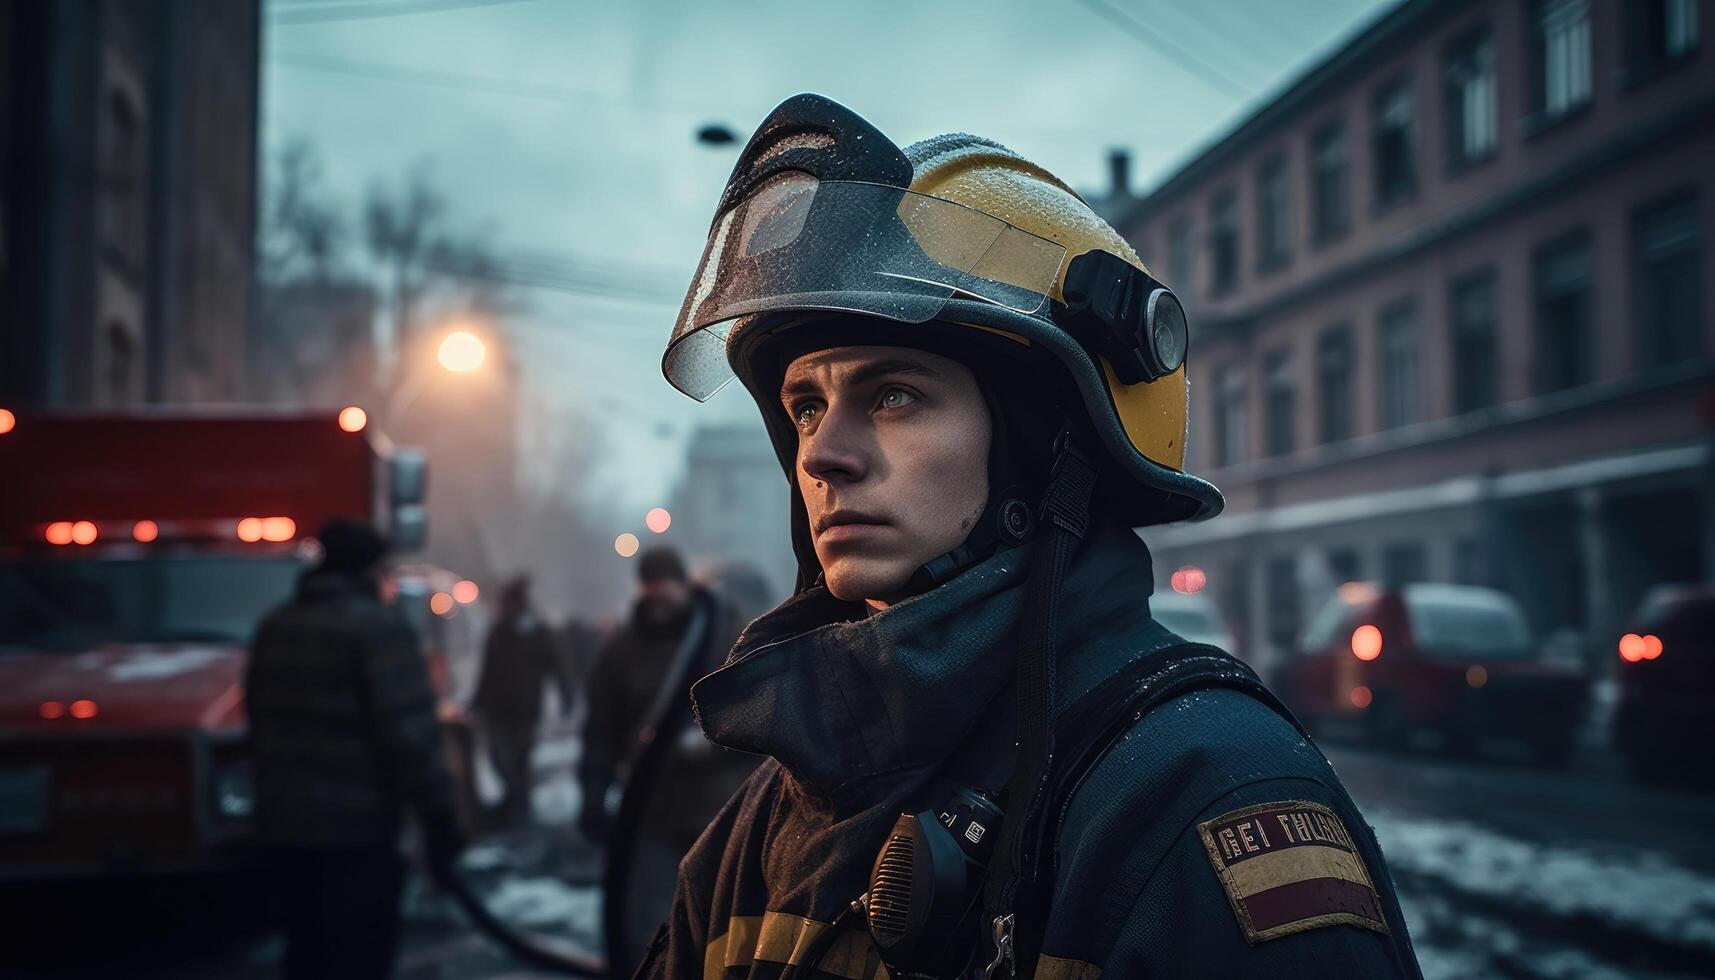 Firefighter standing in a dangerous city. photo